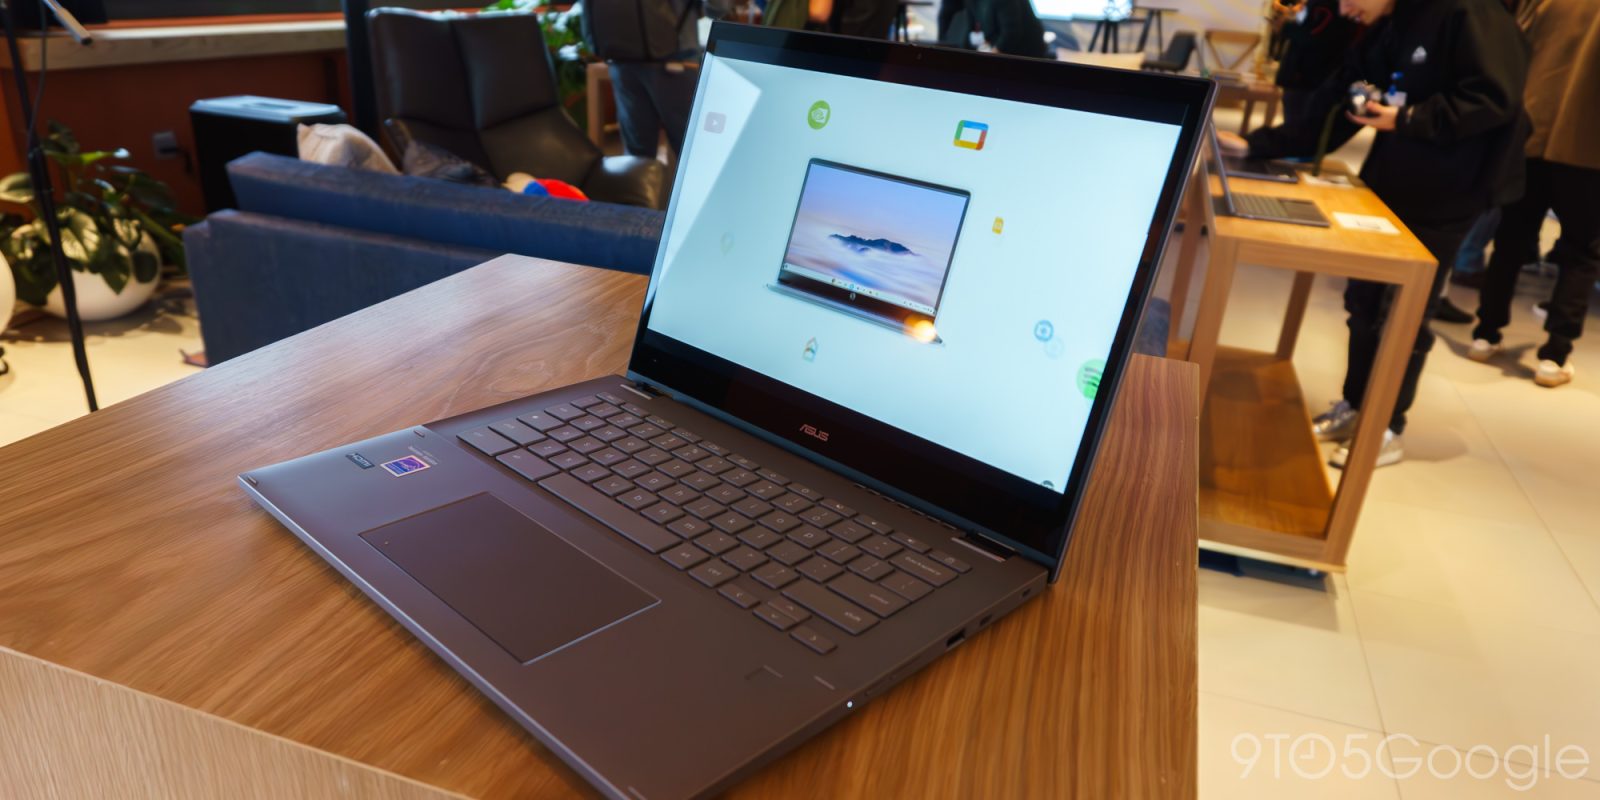 Chromebook Plus laptops debut with hardware requirements